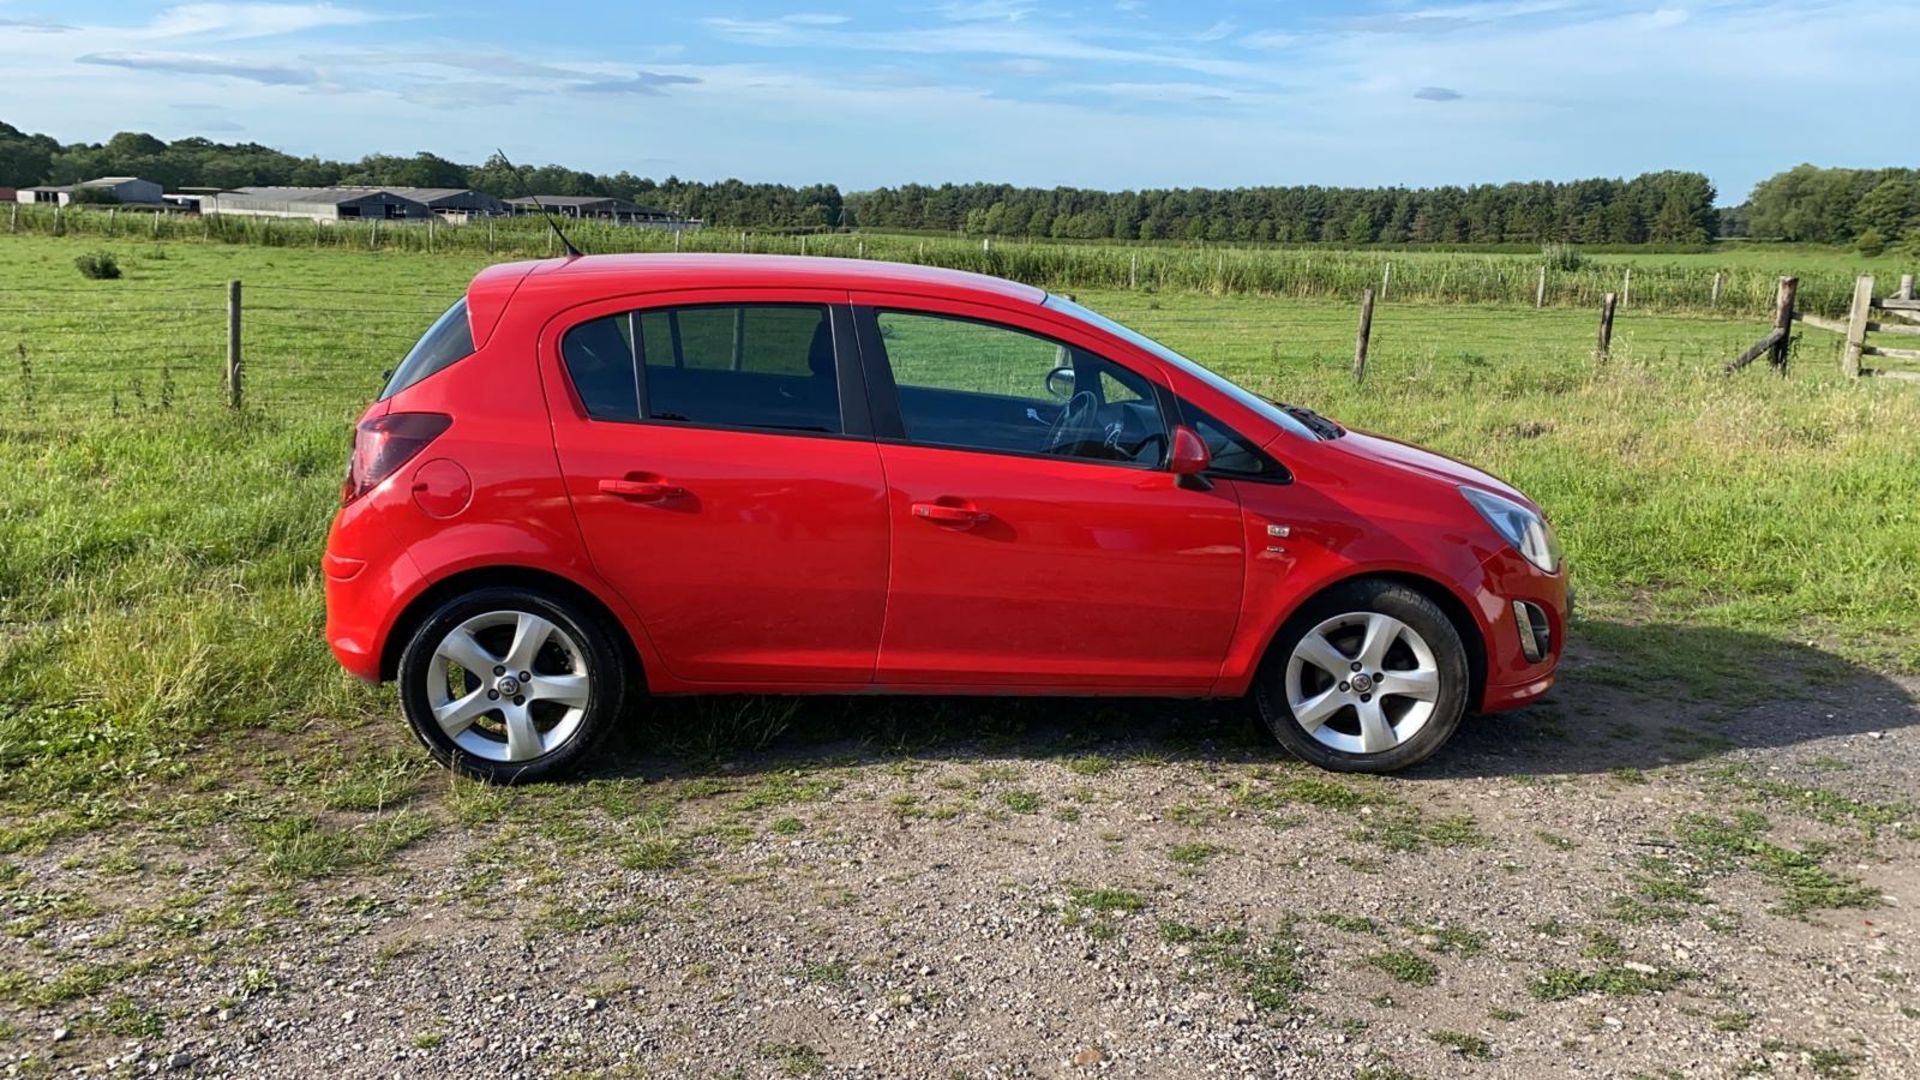 2014/14 REG VAUXHALL CORSA SXI AC ECOFLEX 1.2 PETROL RED 5DR HATCHBACK, SHOWING 2 FORMER KEEPERS - Image 8 of 12